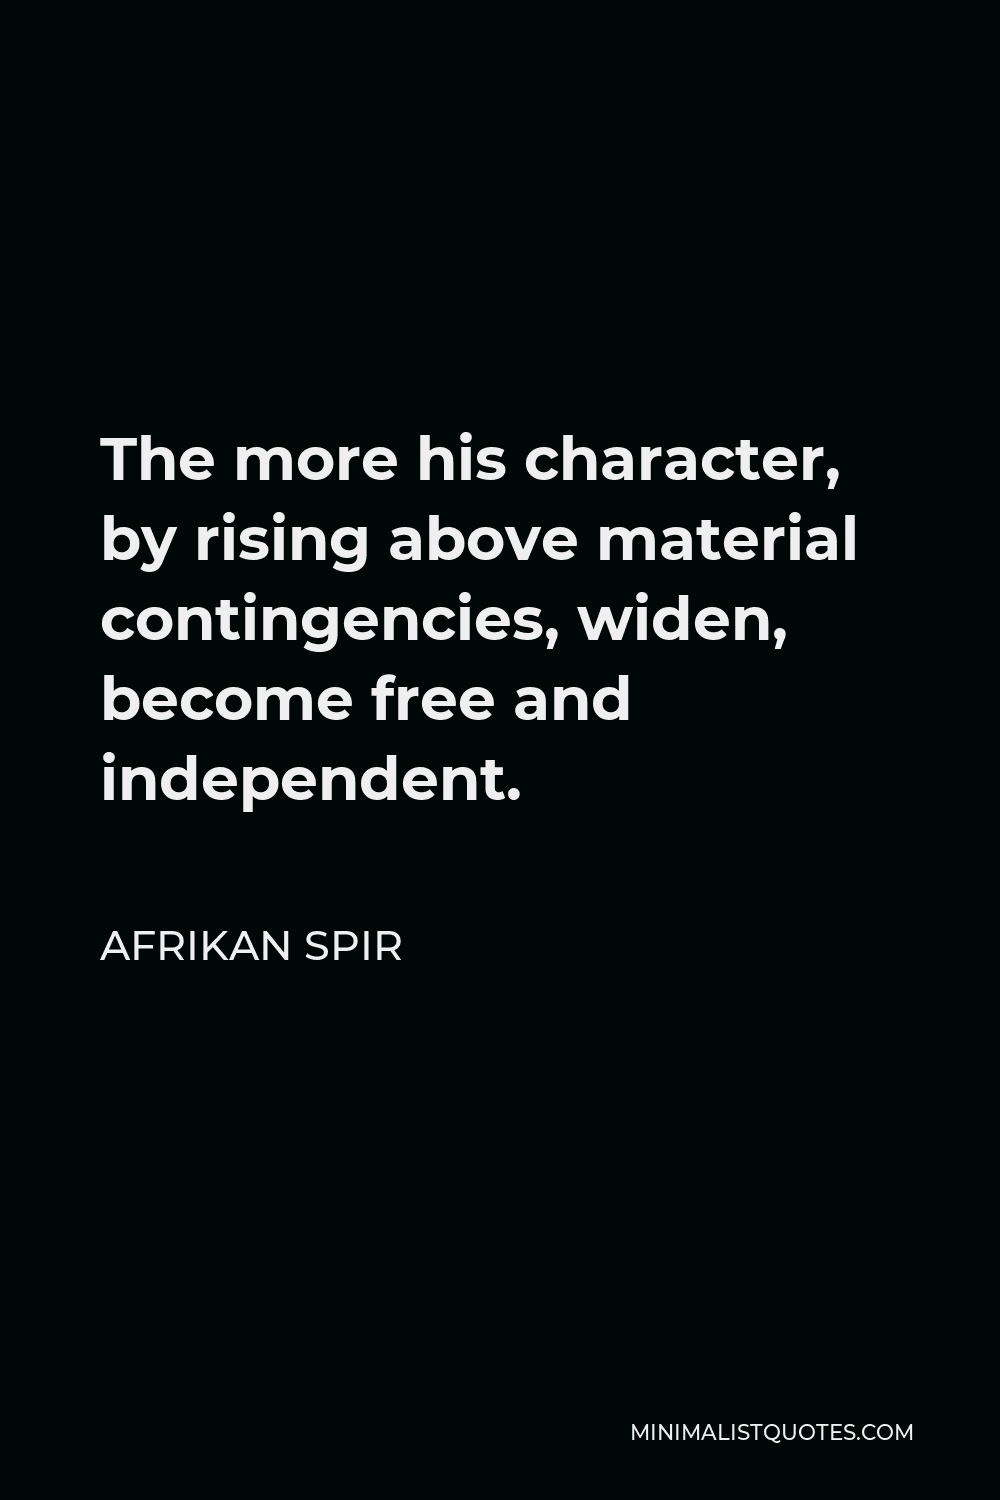 Afrikan Spir Quote - The more his character, by rising above material contingencies, widen, become free and independent.